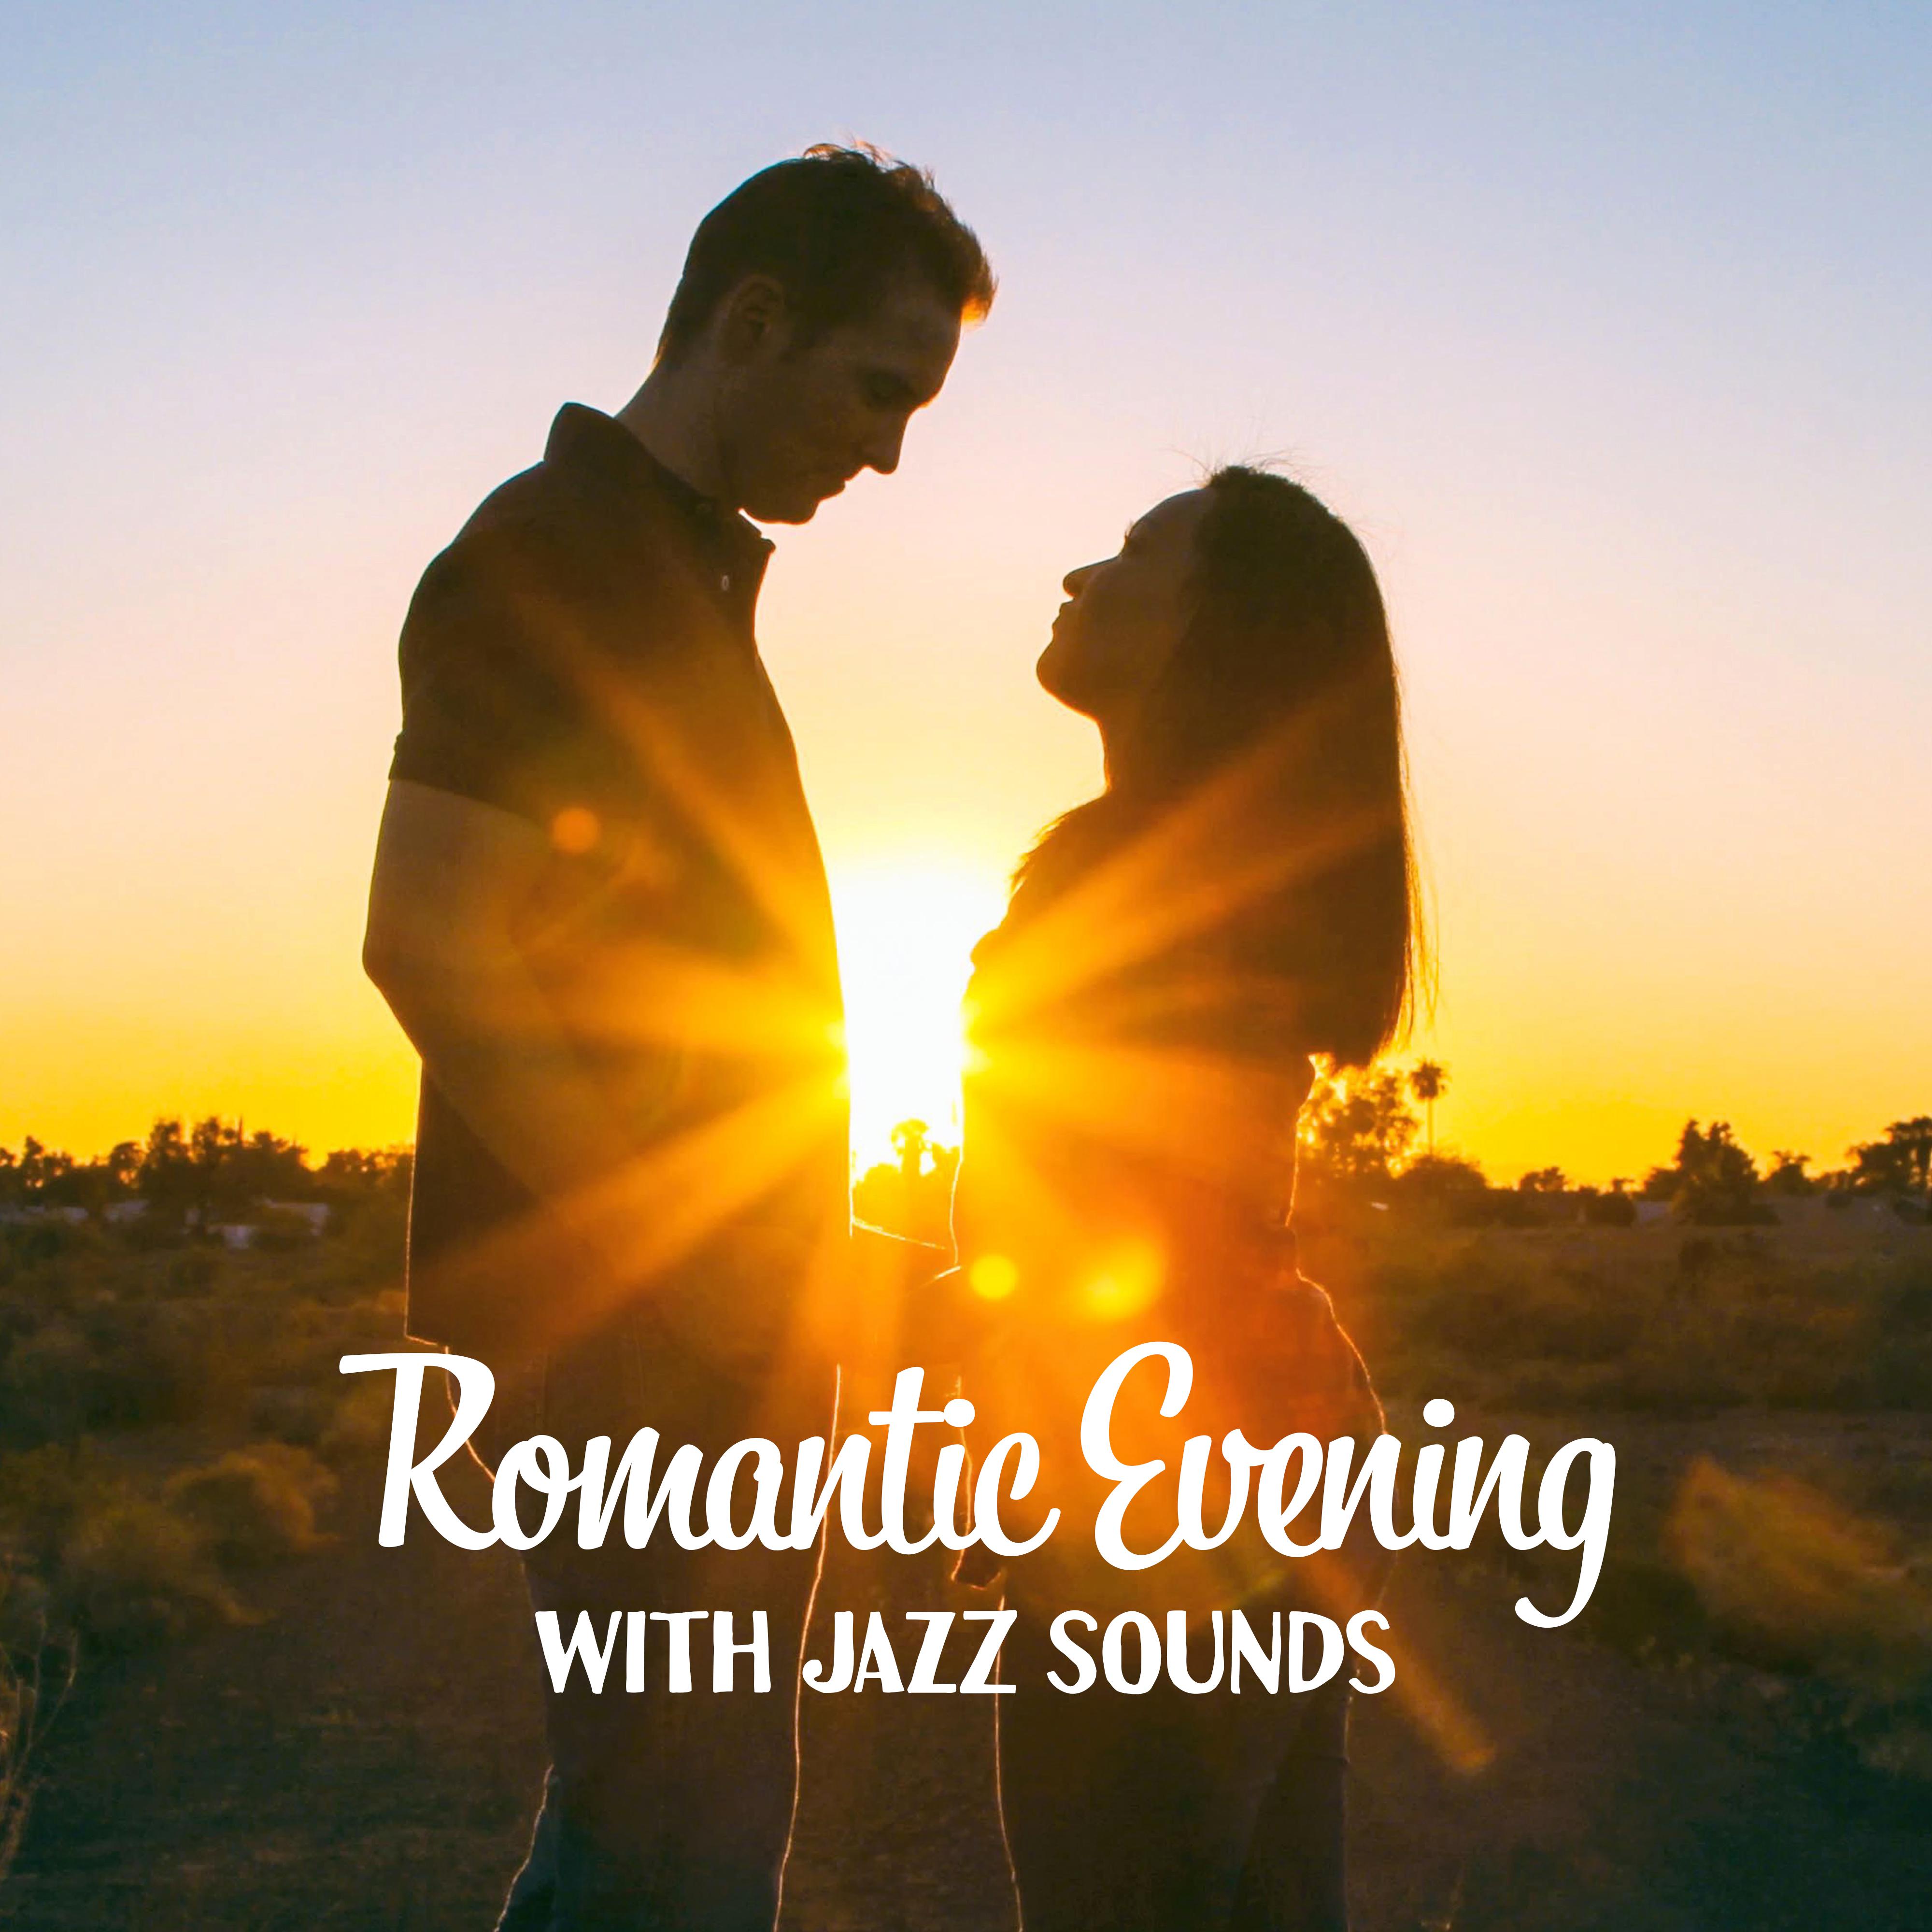 Romantic Evening with Jazz Sounds